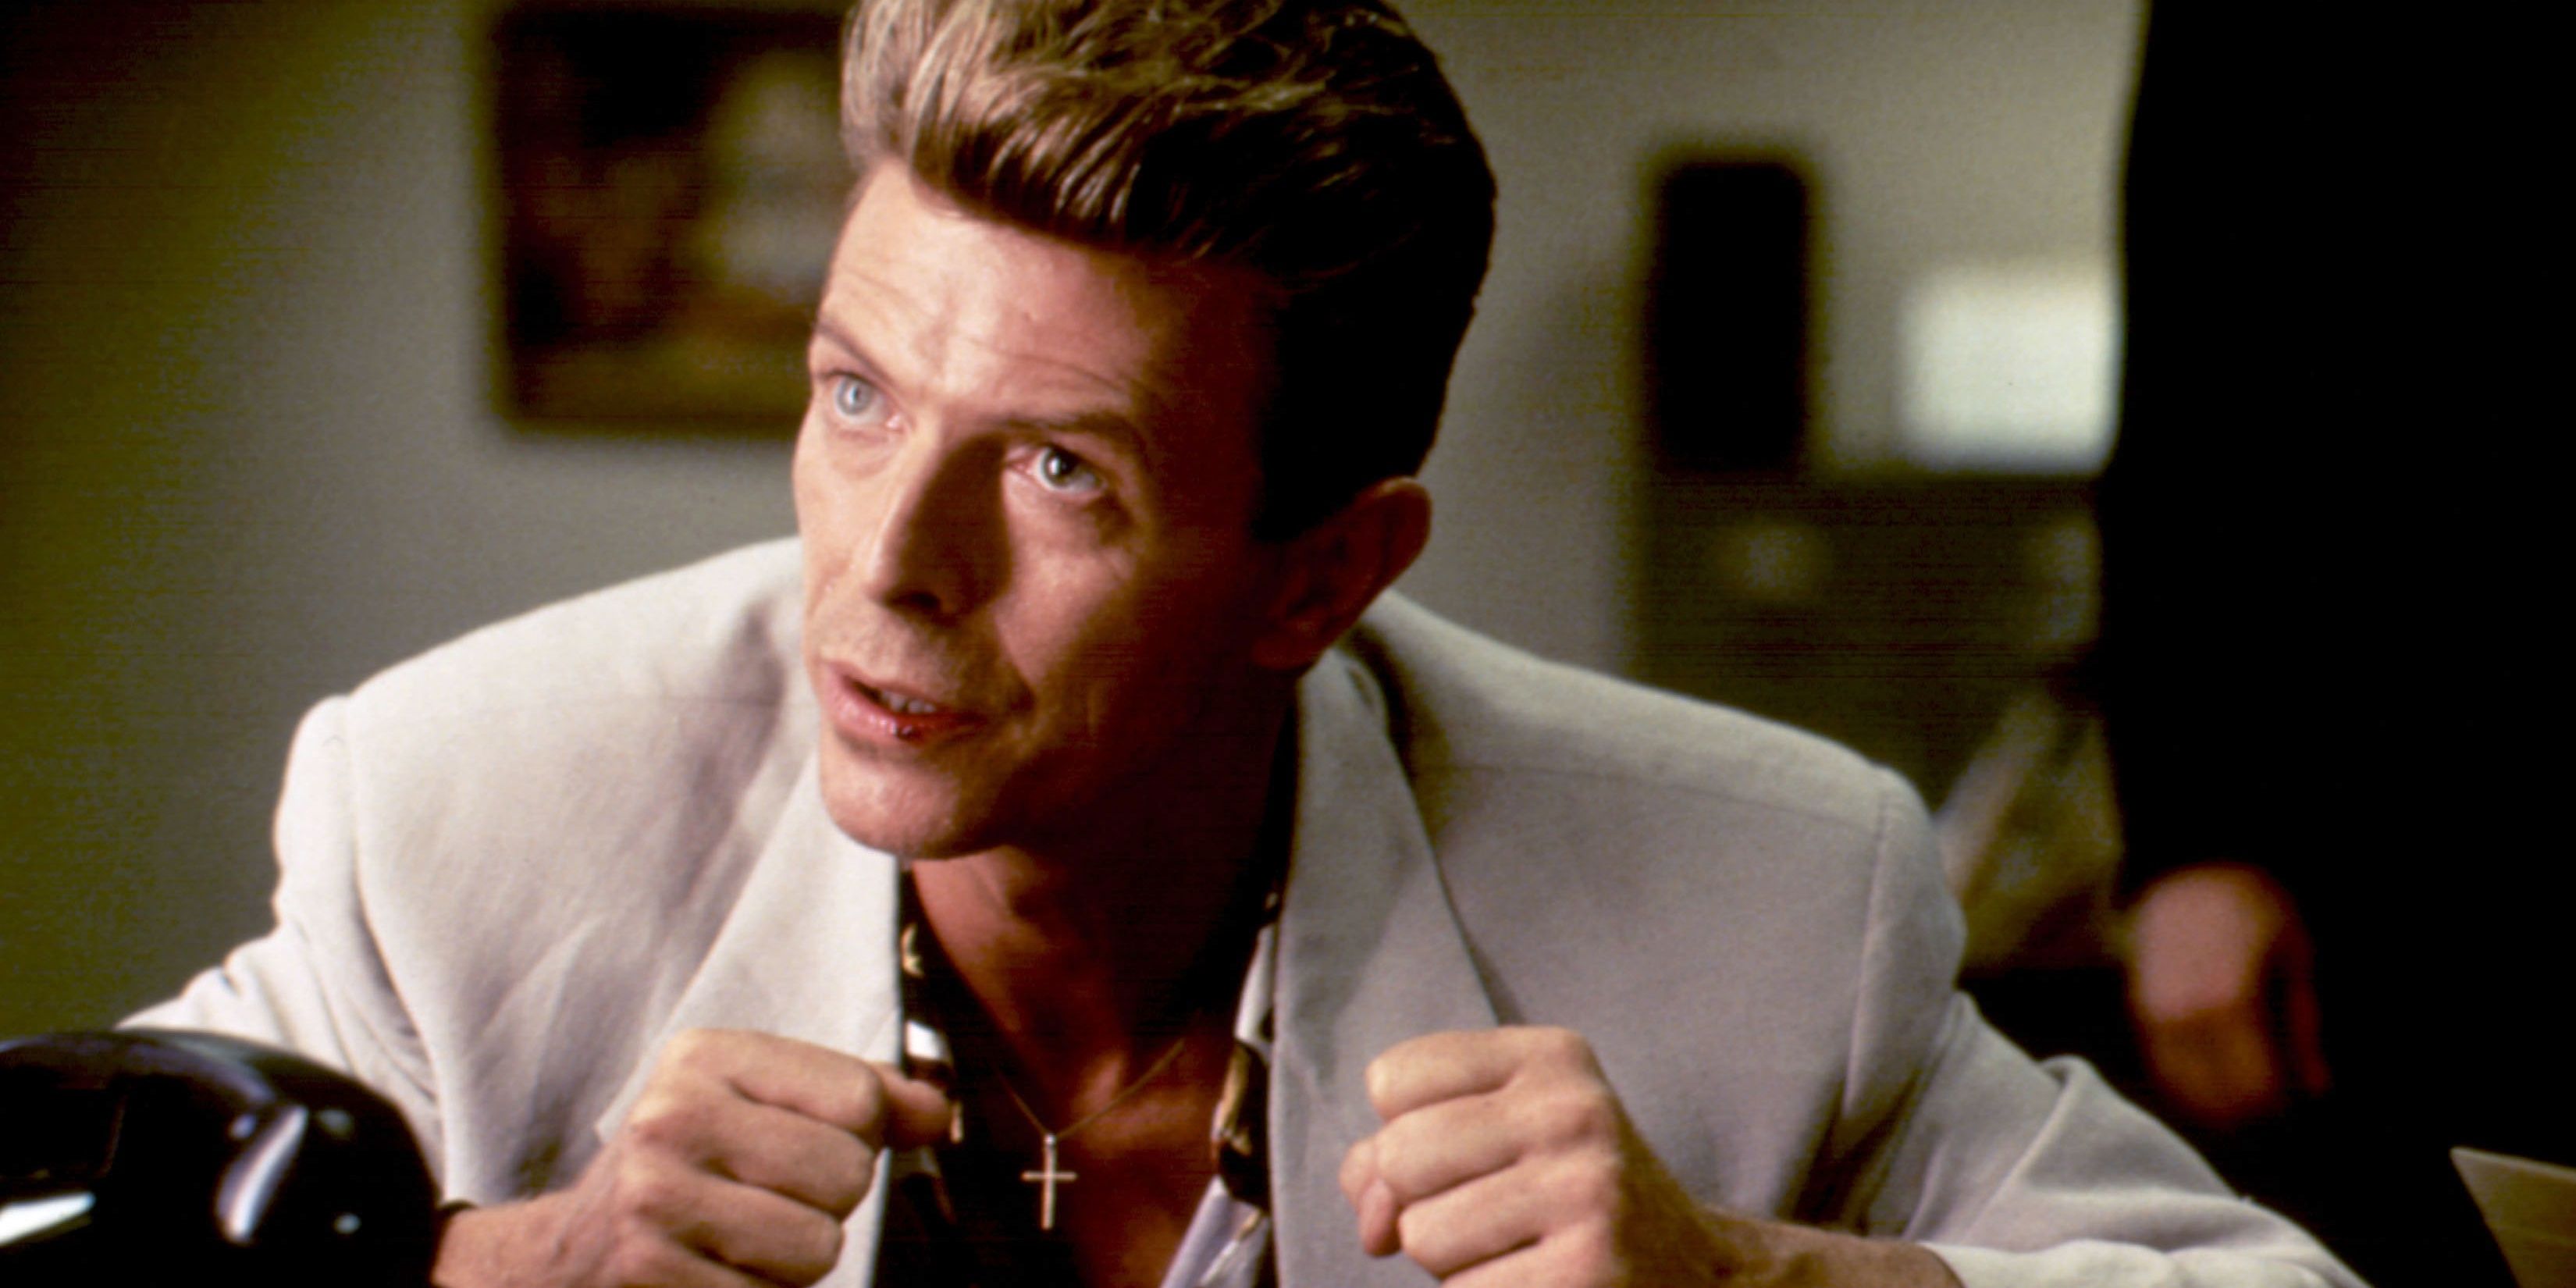 David Bowie arguing with someone in Twin Peaks